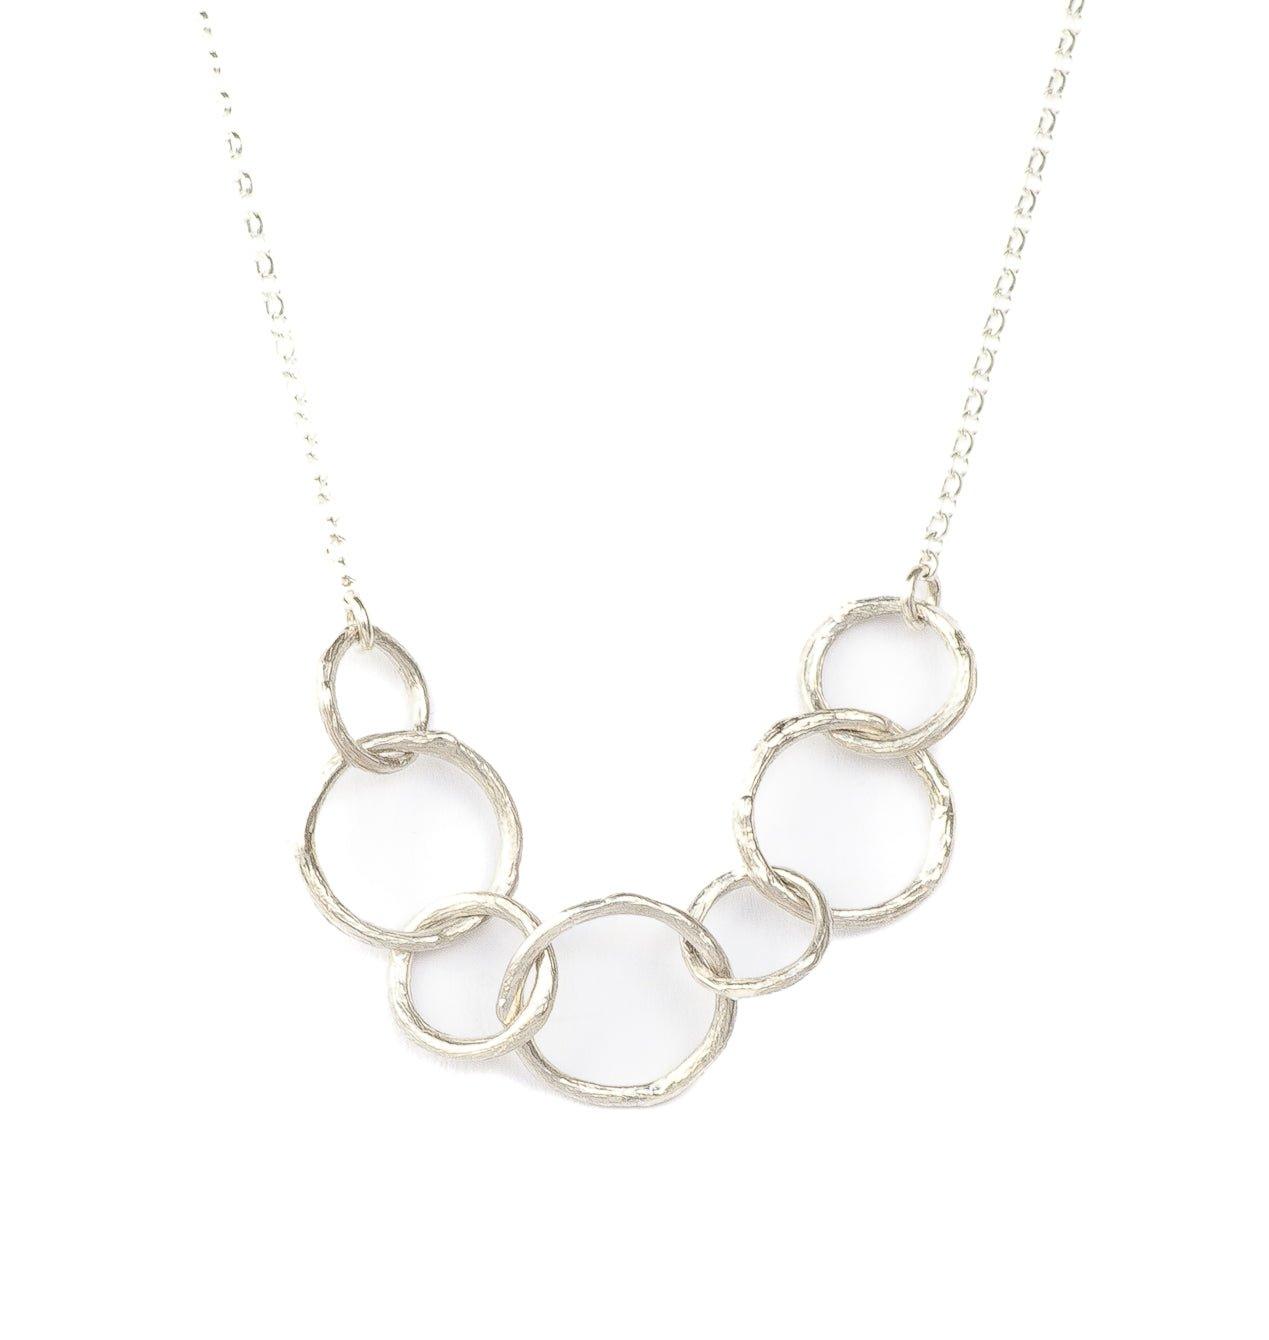 Silver Circle Chain Necklace Amulette Jewellery